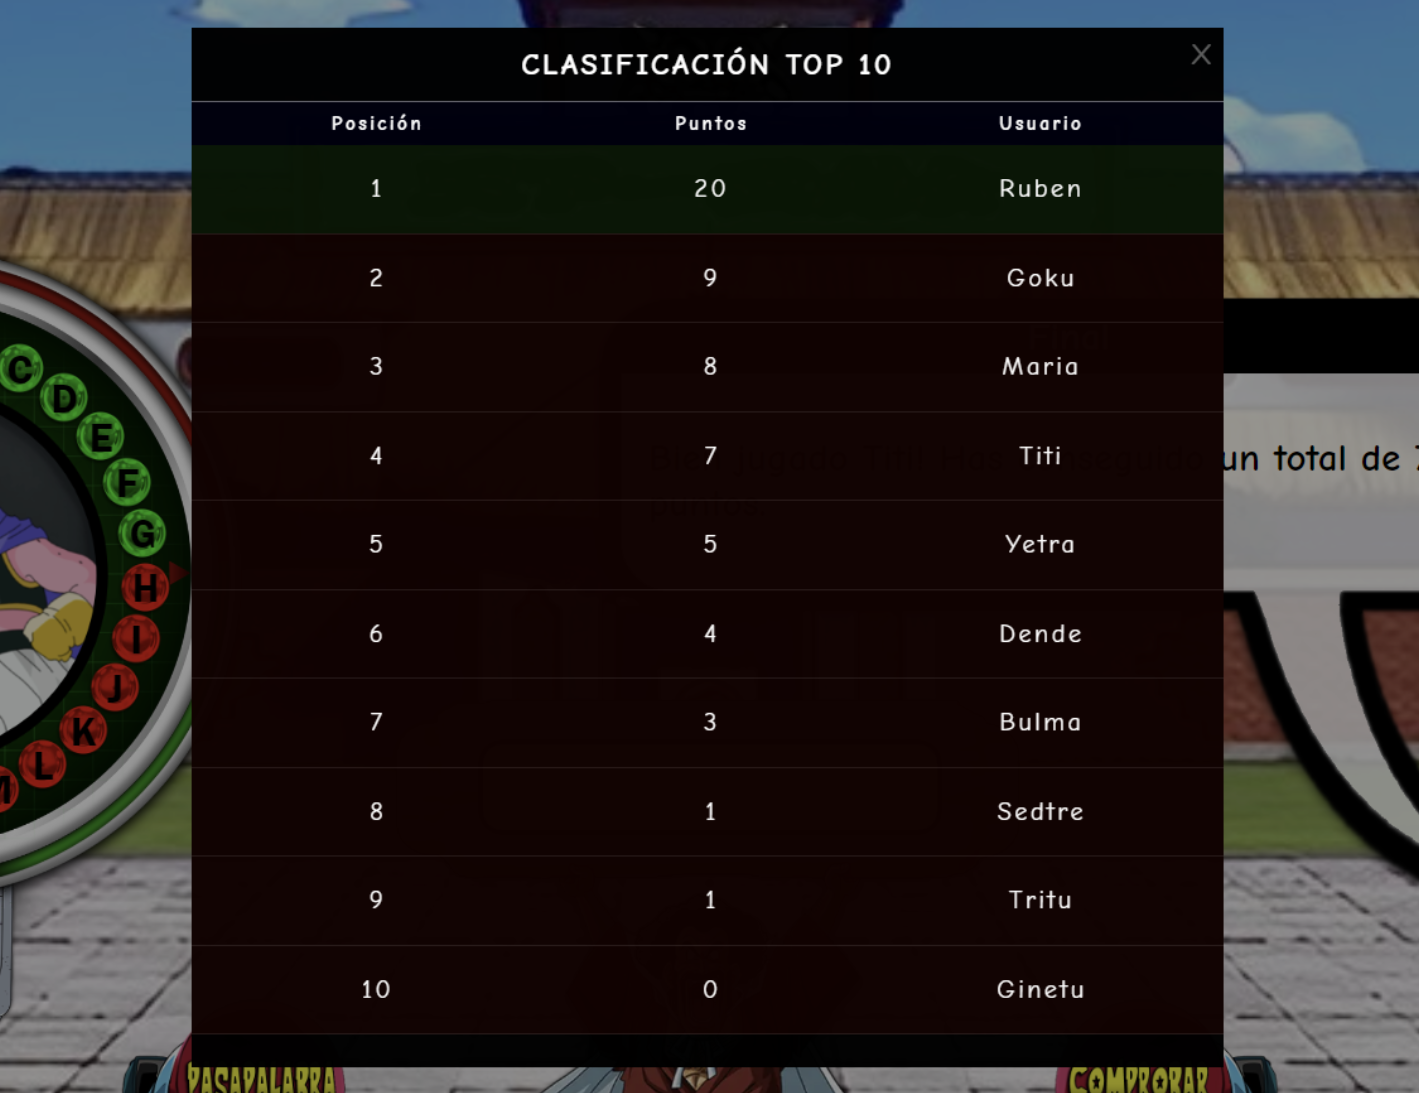 Leaderboard showing the top 10 users with the highest scores.